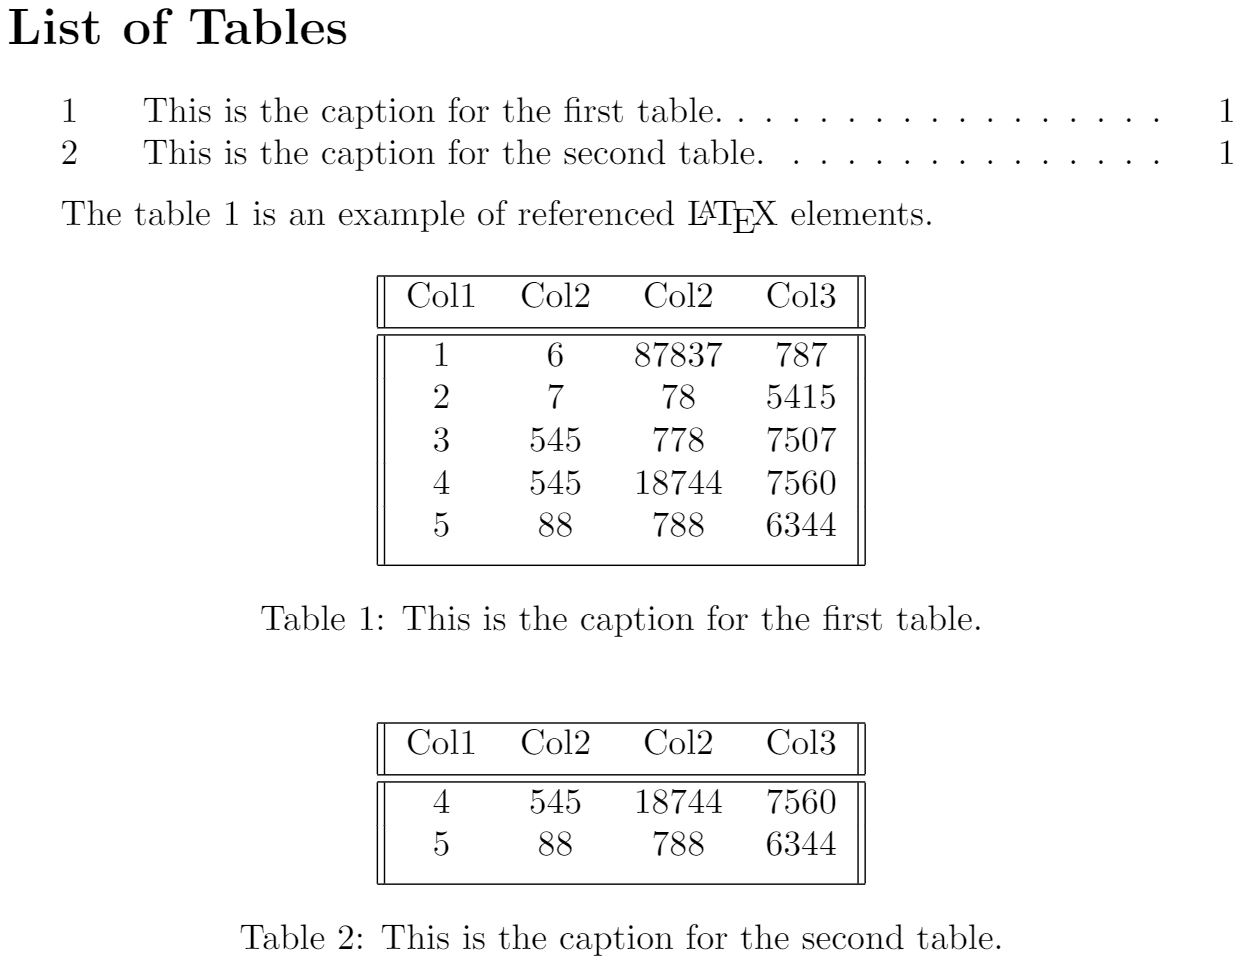 Example of list of tables